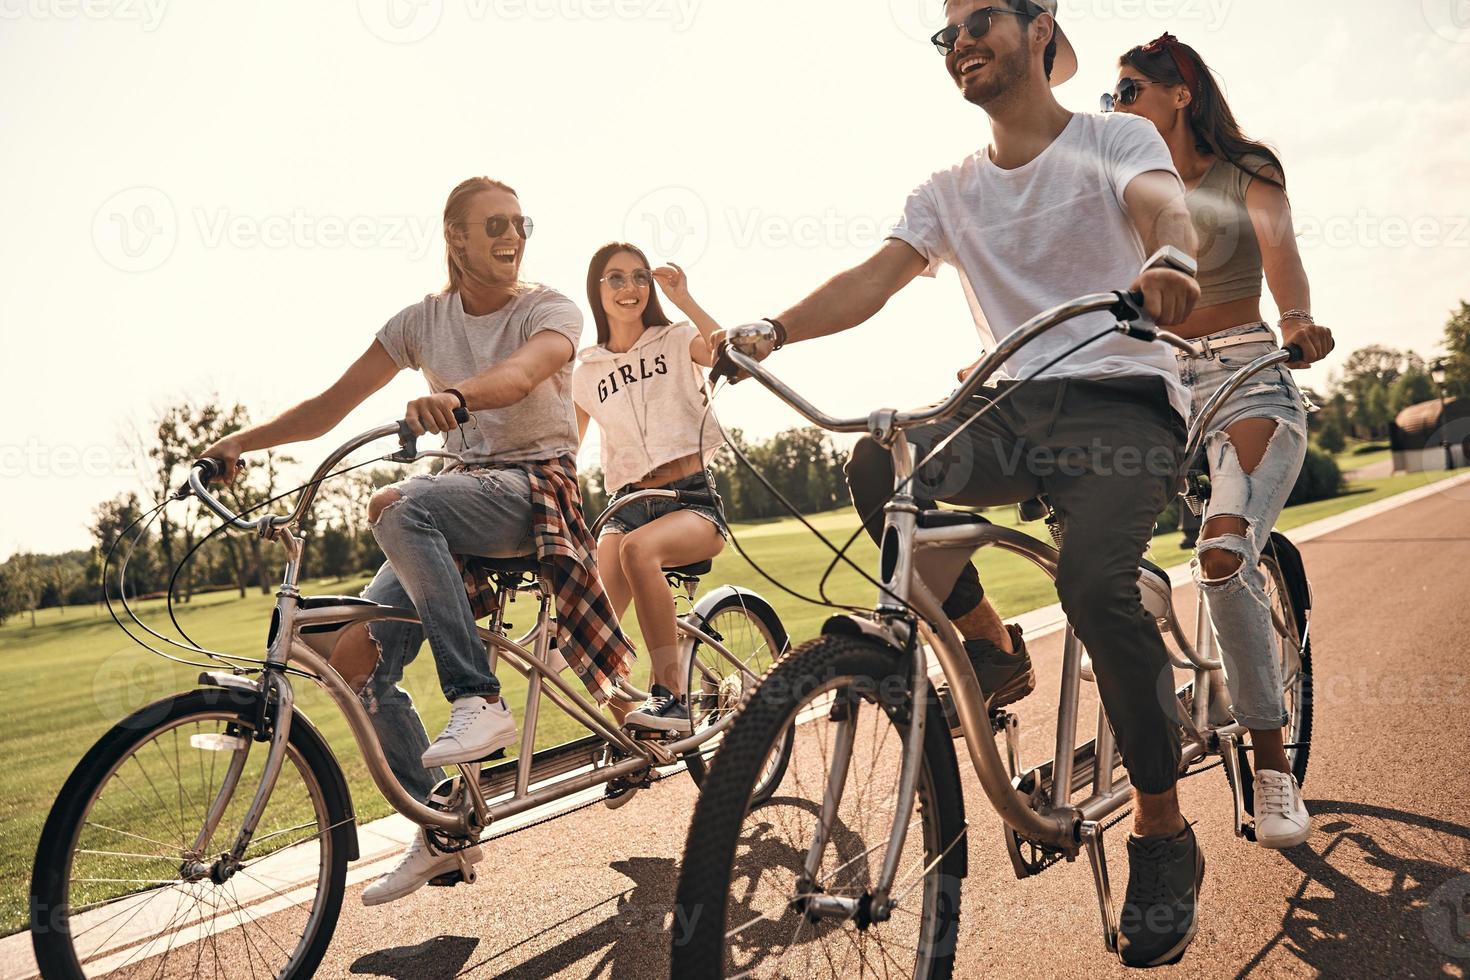 Carefree summer day. Group of happy young people in casual wear smiling while cycling together outdoors photo